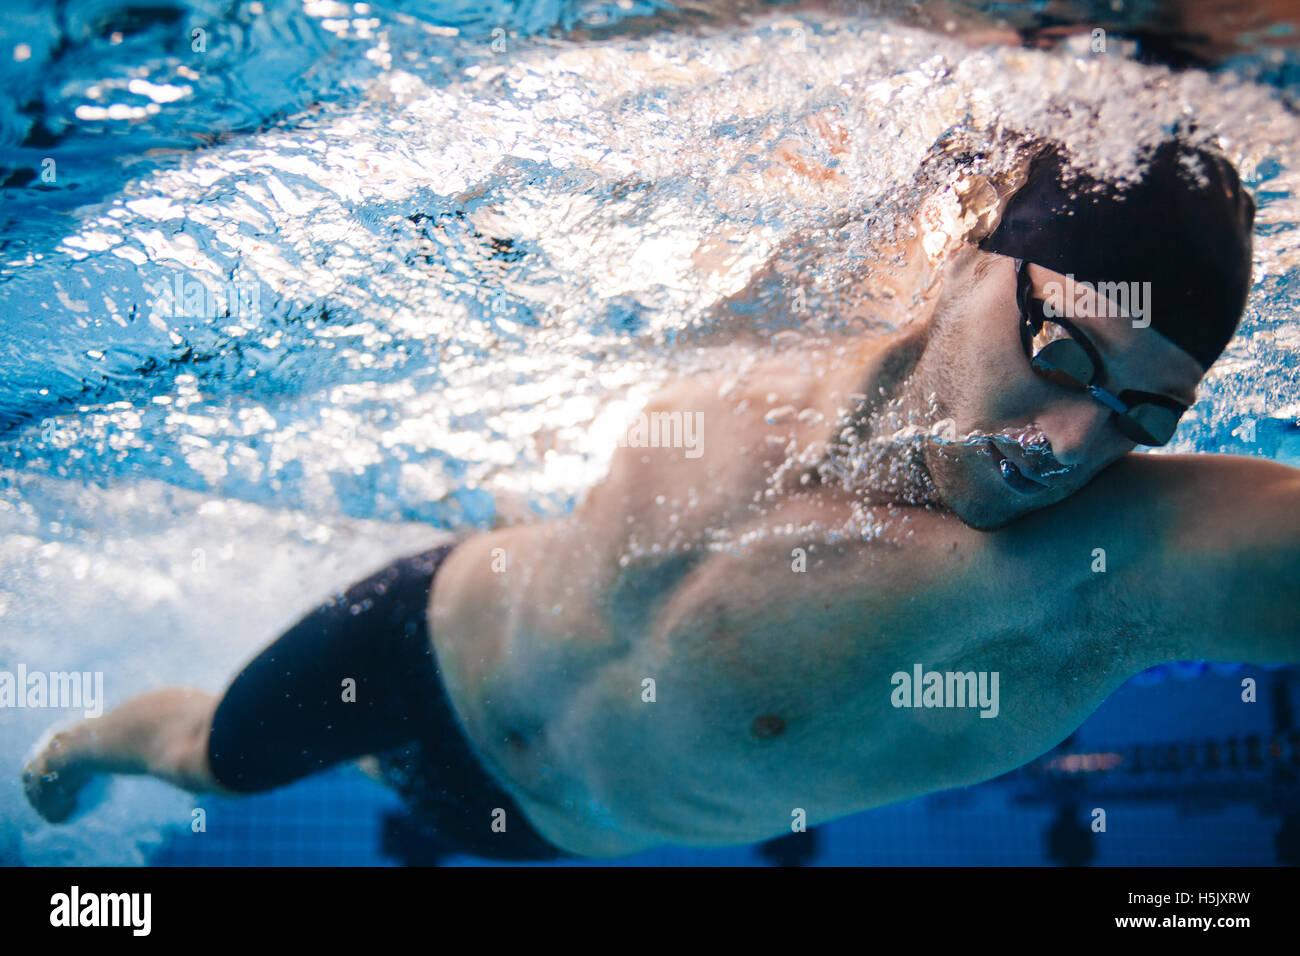 Professional male swimmer inside swimming pool. Underwater shot of fit young man practising in pool. Stock Photo